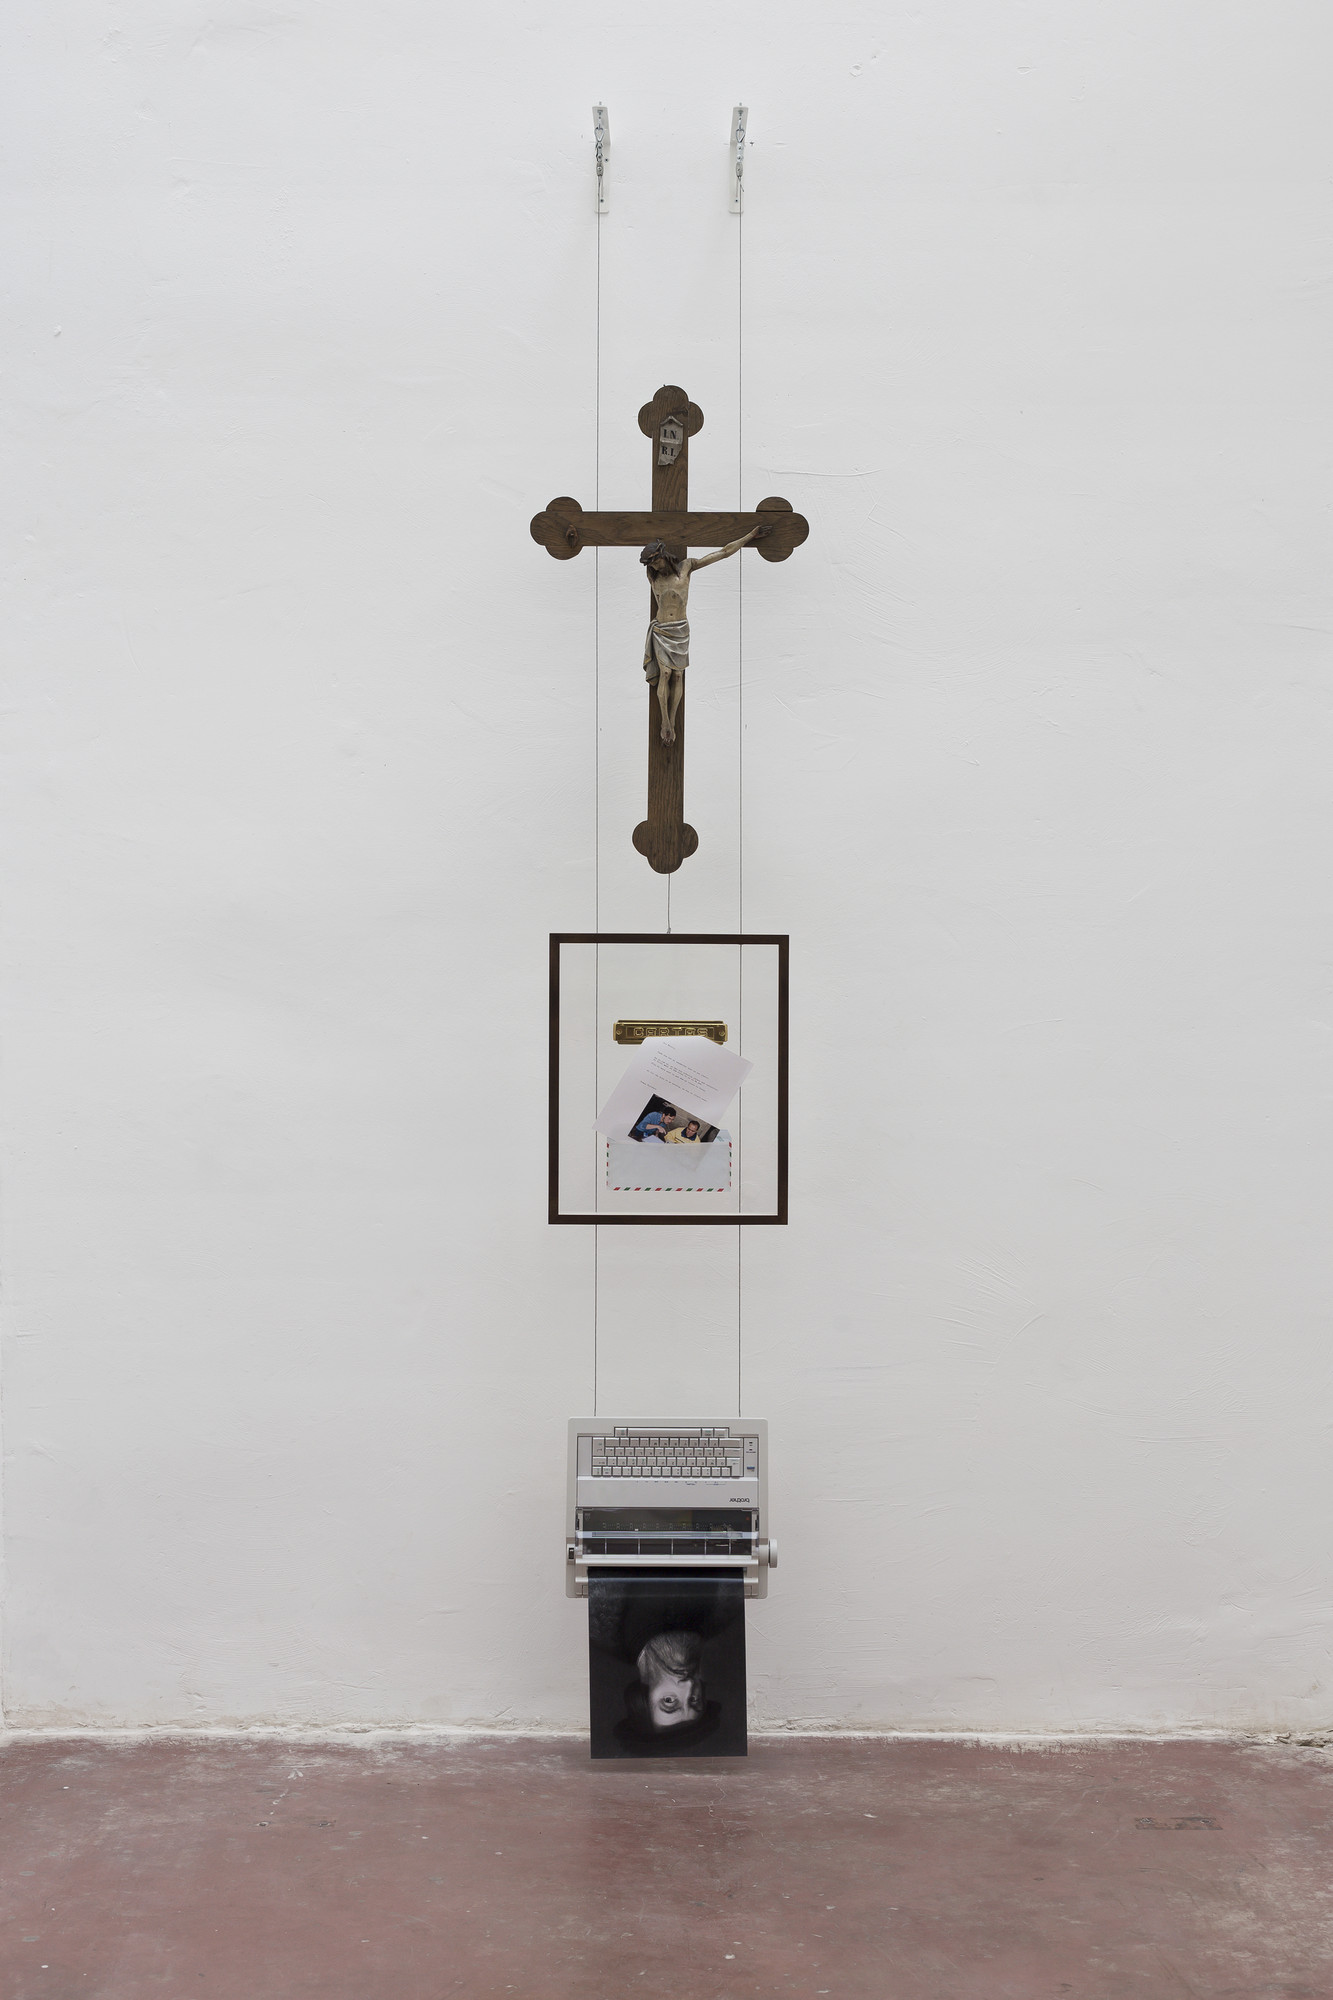 Simon Fujiwara, Gifts returned (reading, believing), from the series Letters from Mexico, 2014, Mixed media, 320 x 54 cm, unique